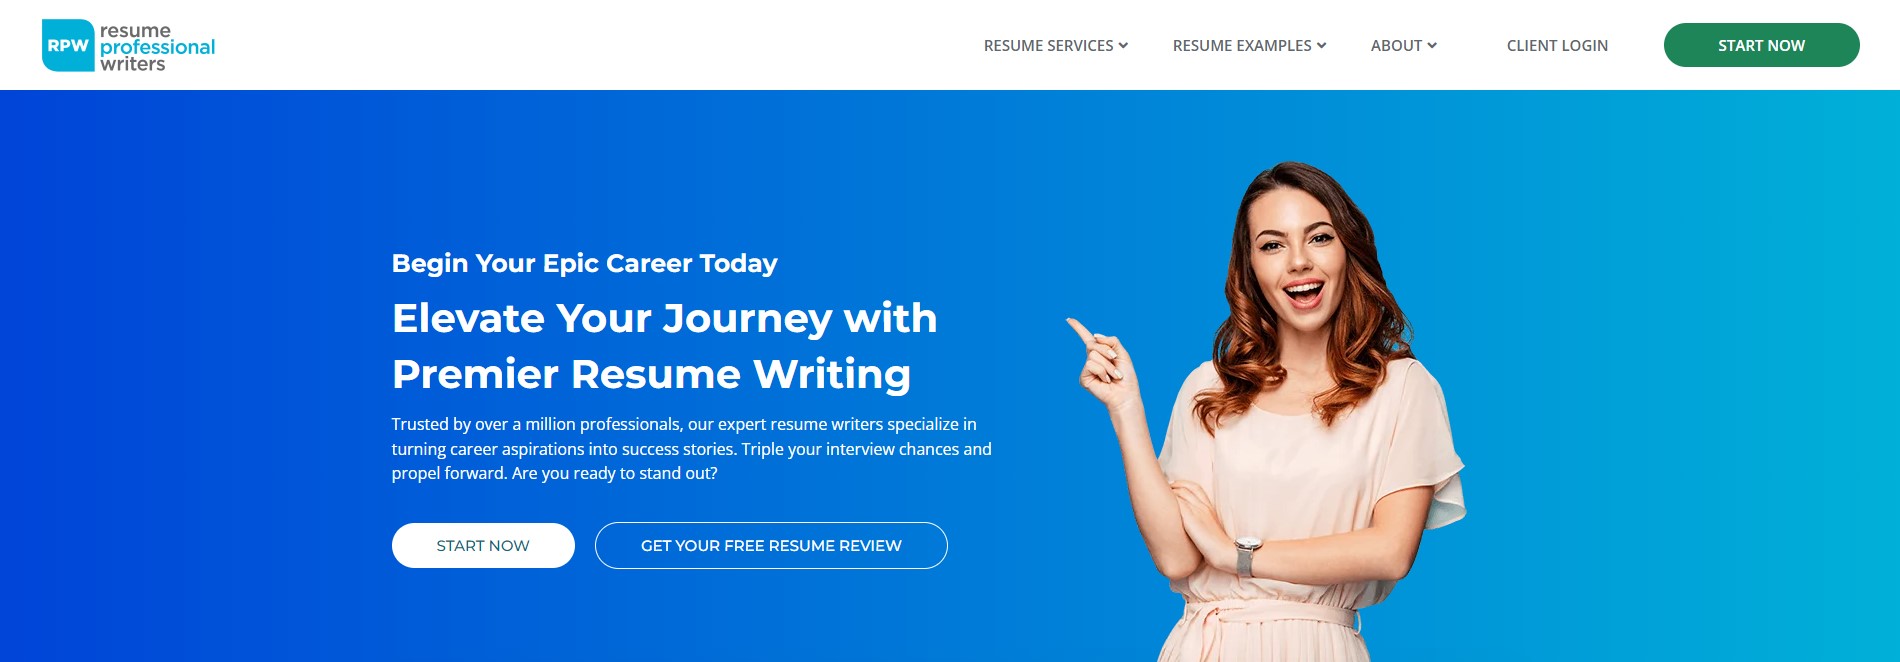 Advertising Resume Writing Services Rpw Hero Section